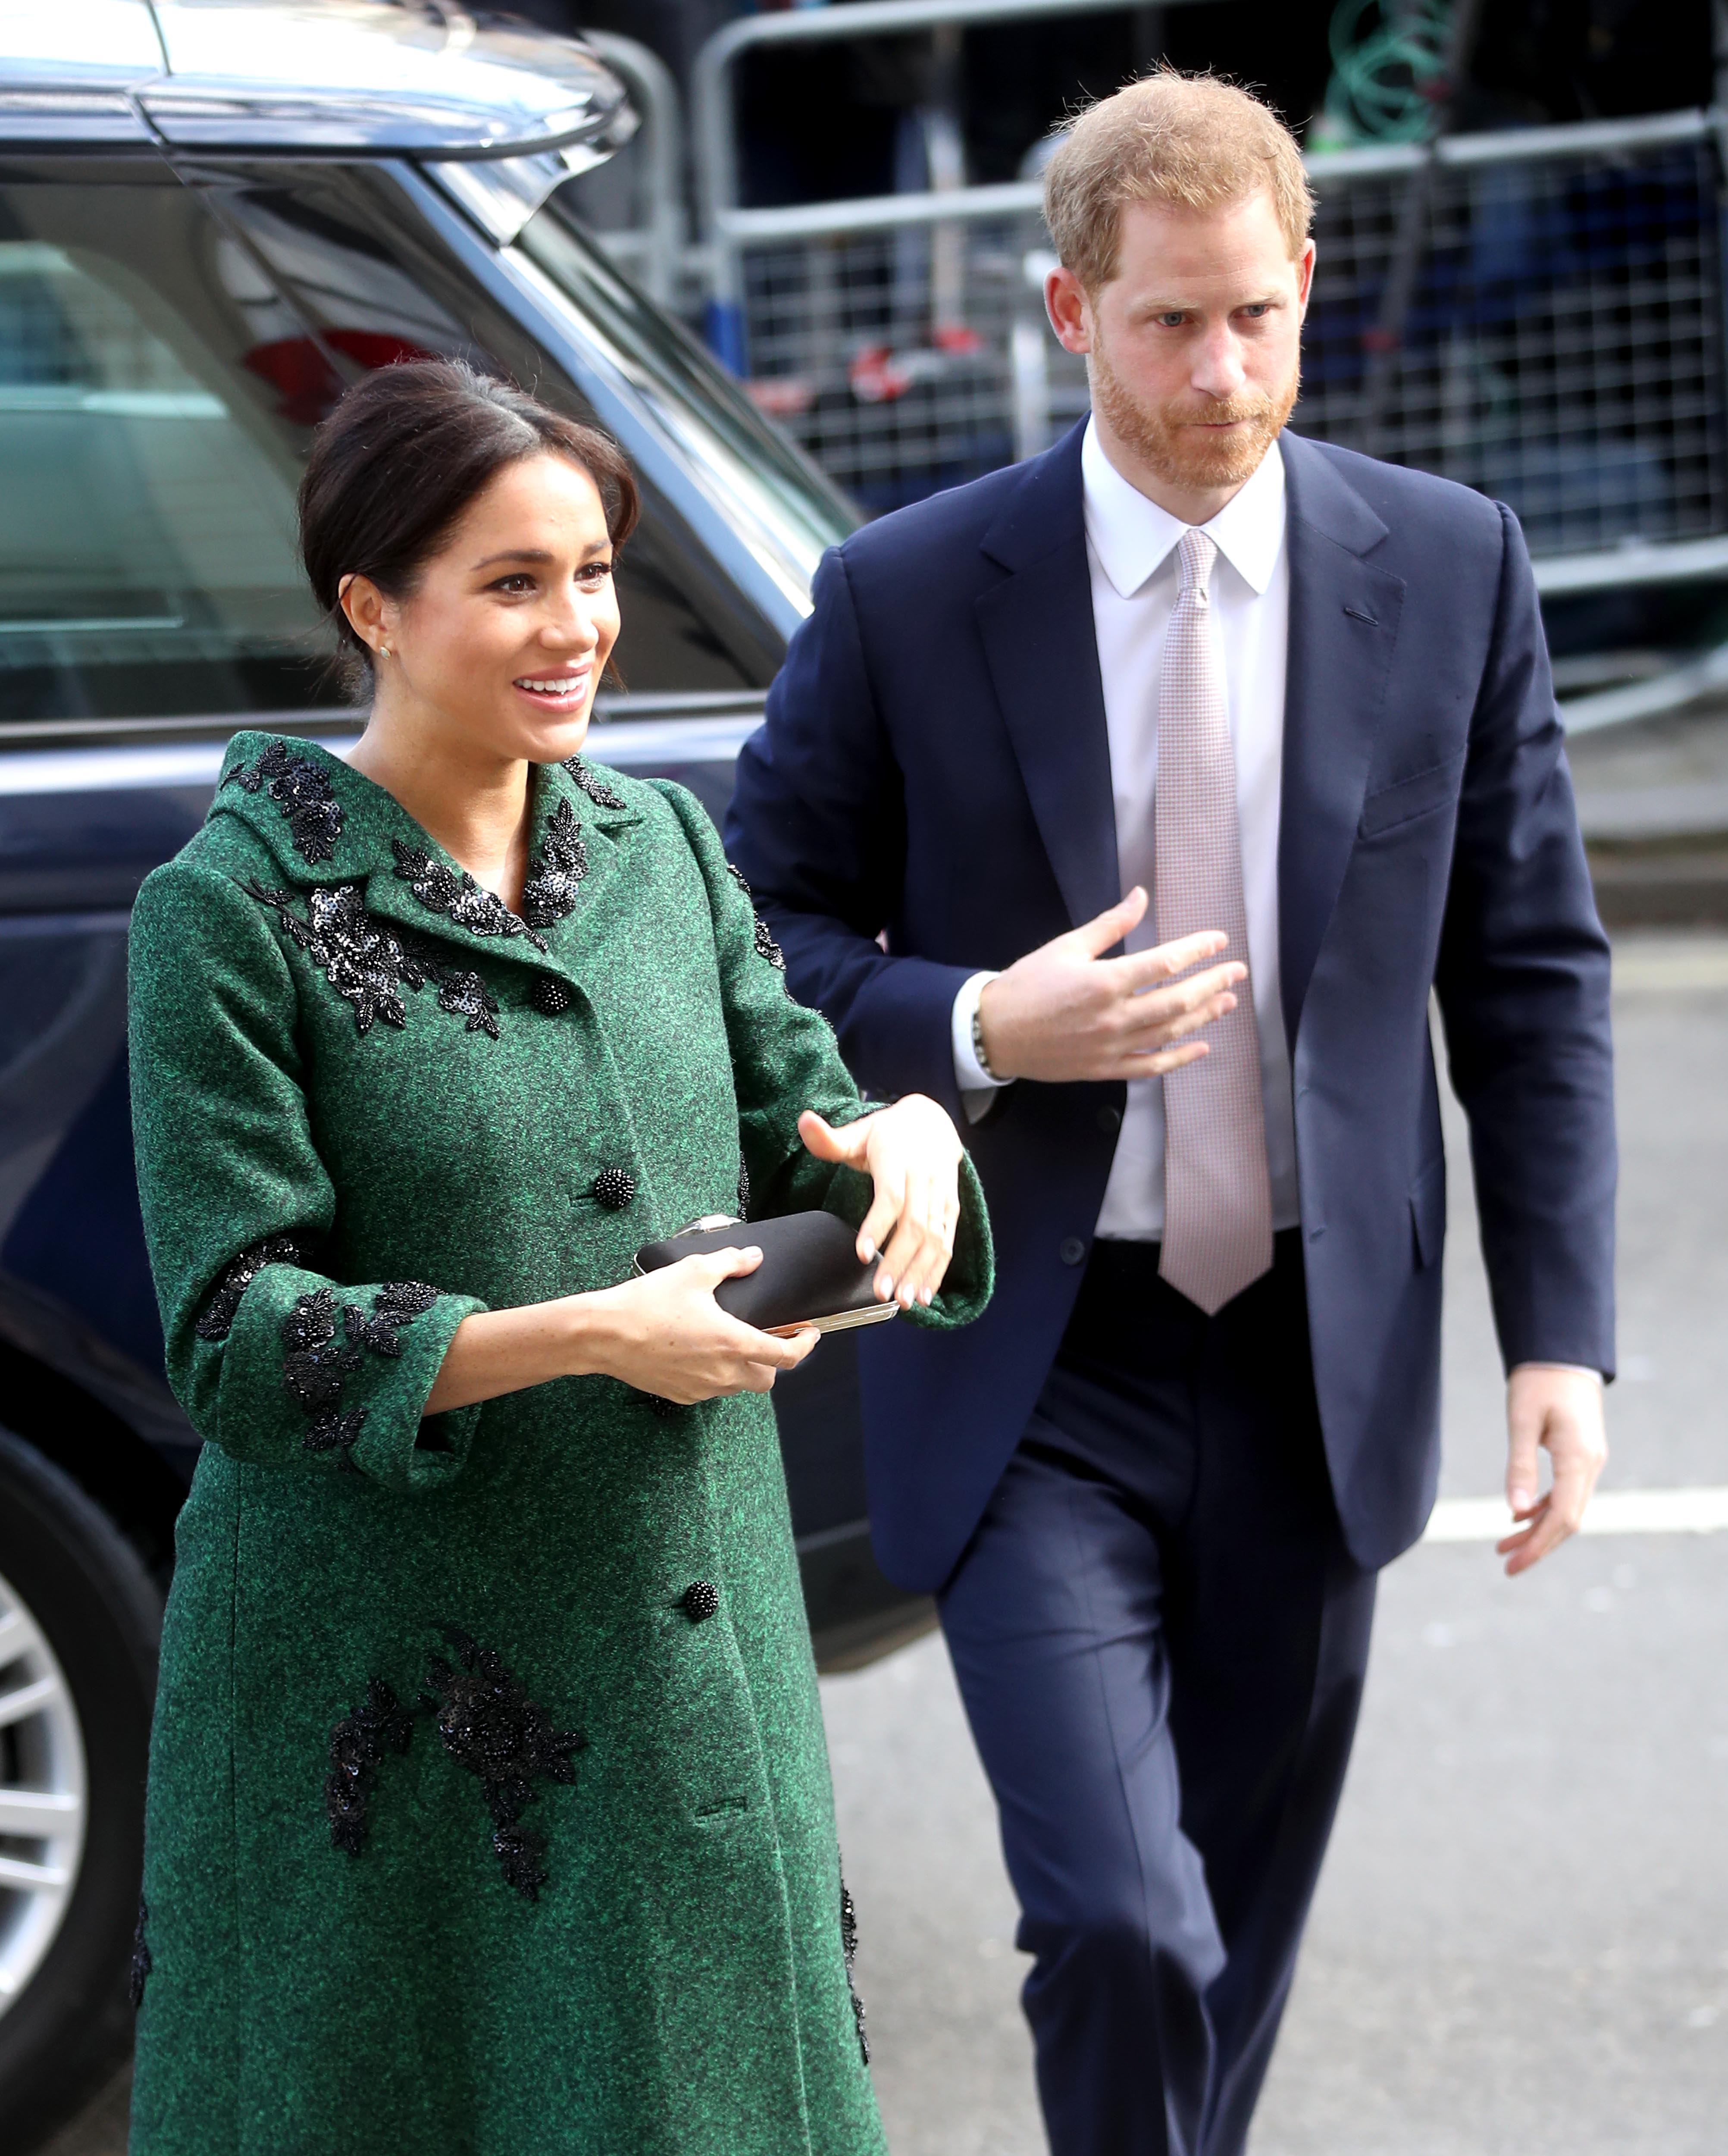 Meghan and Prince Harry attend a Commonwealth Day Youth Event at Canada House on March 11, 2019, in London, England. | Source: Getty Images